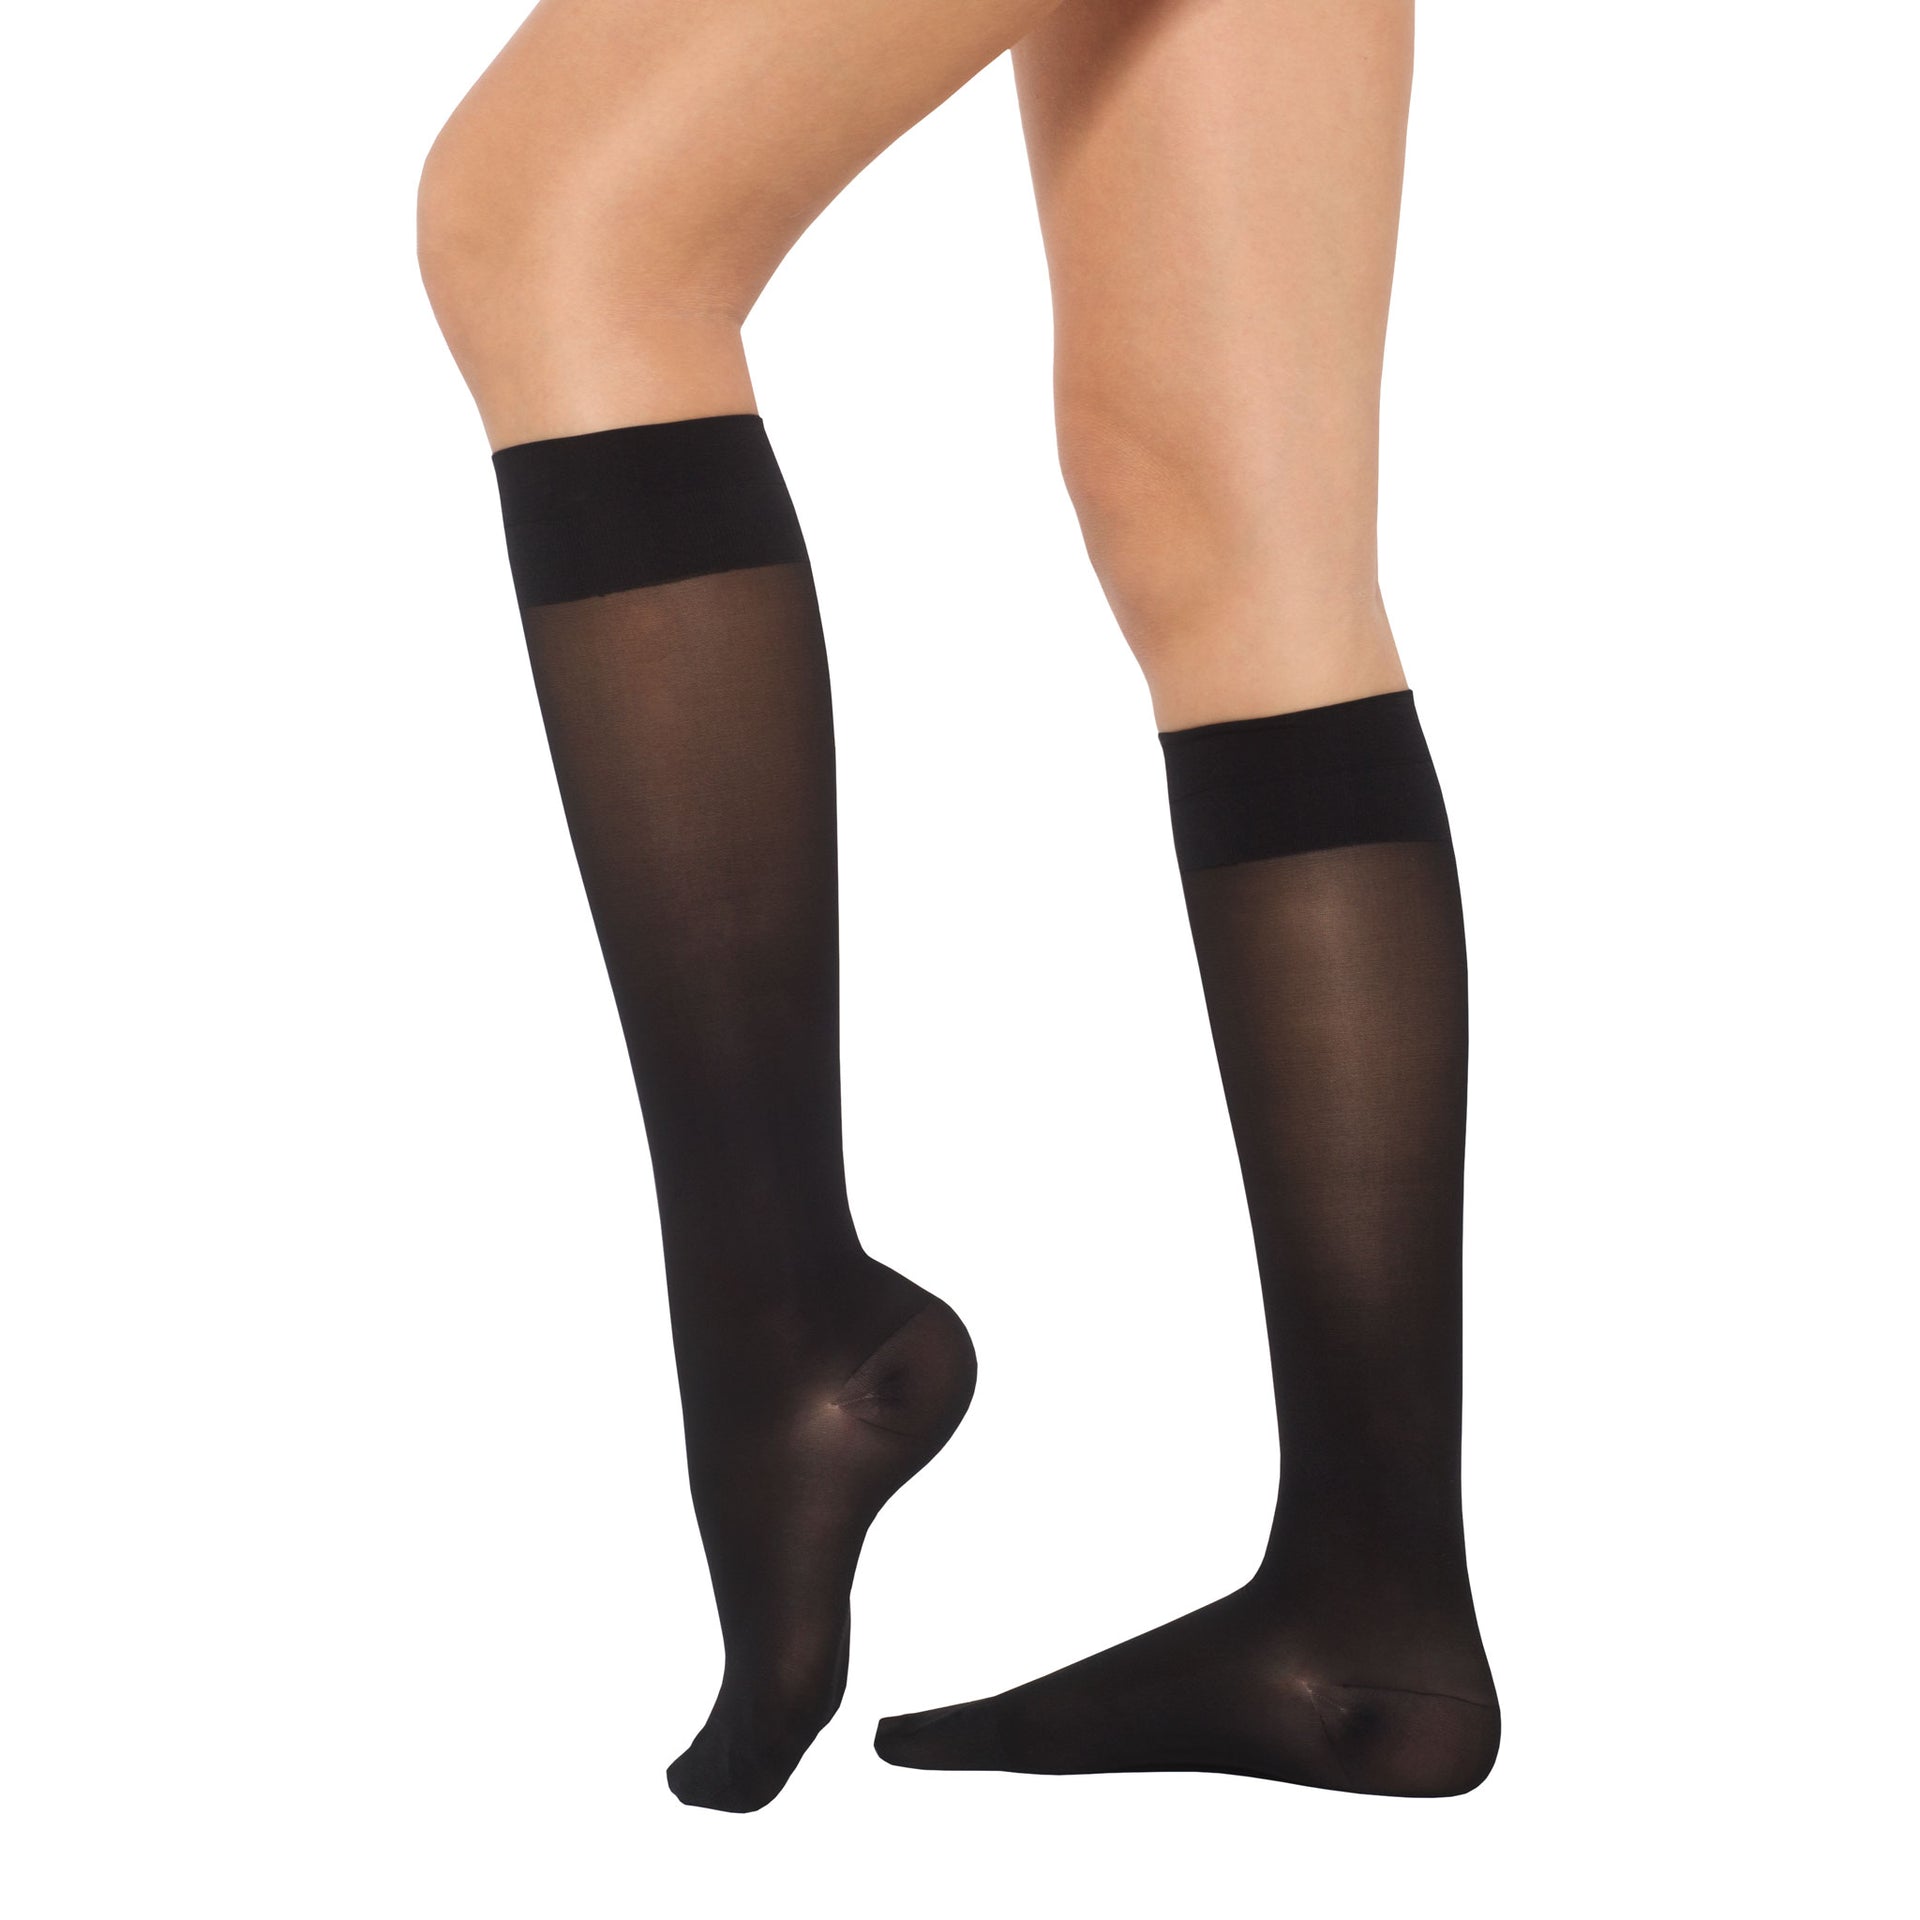 Knee-high with graduated compression